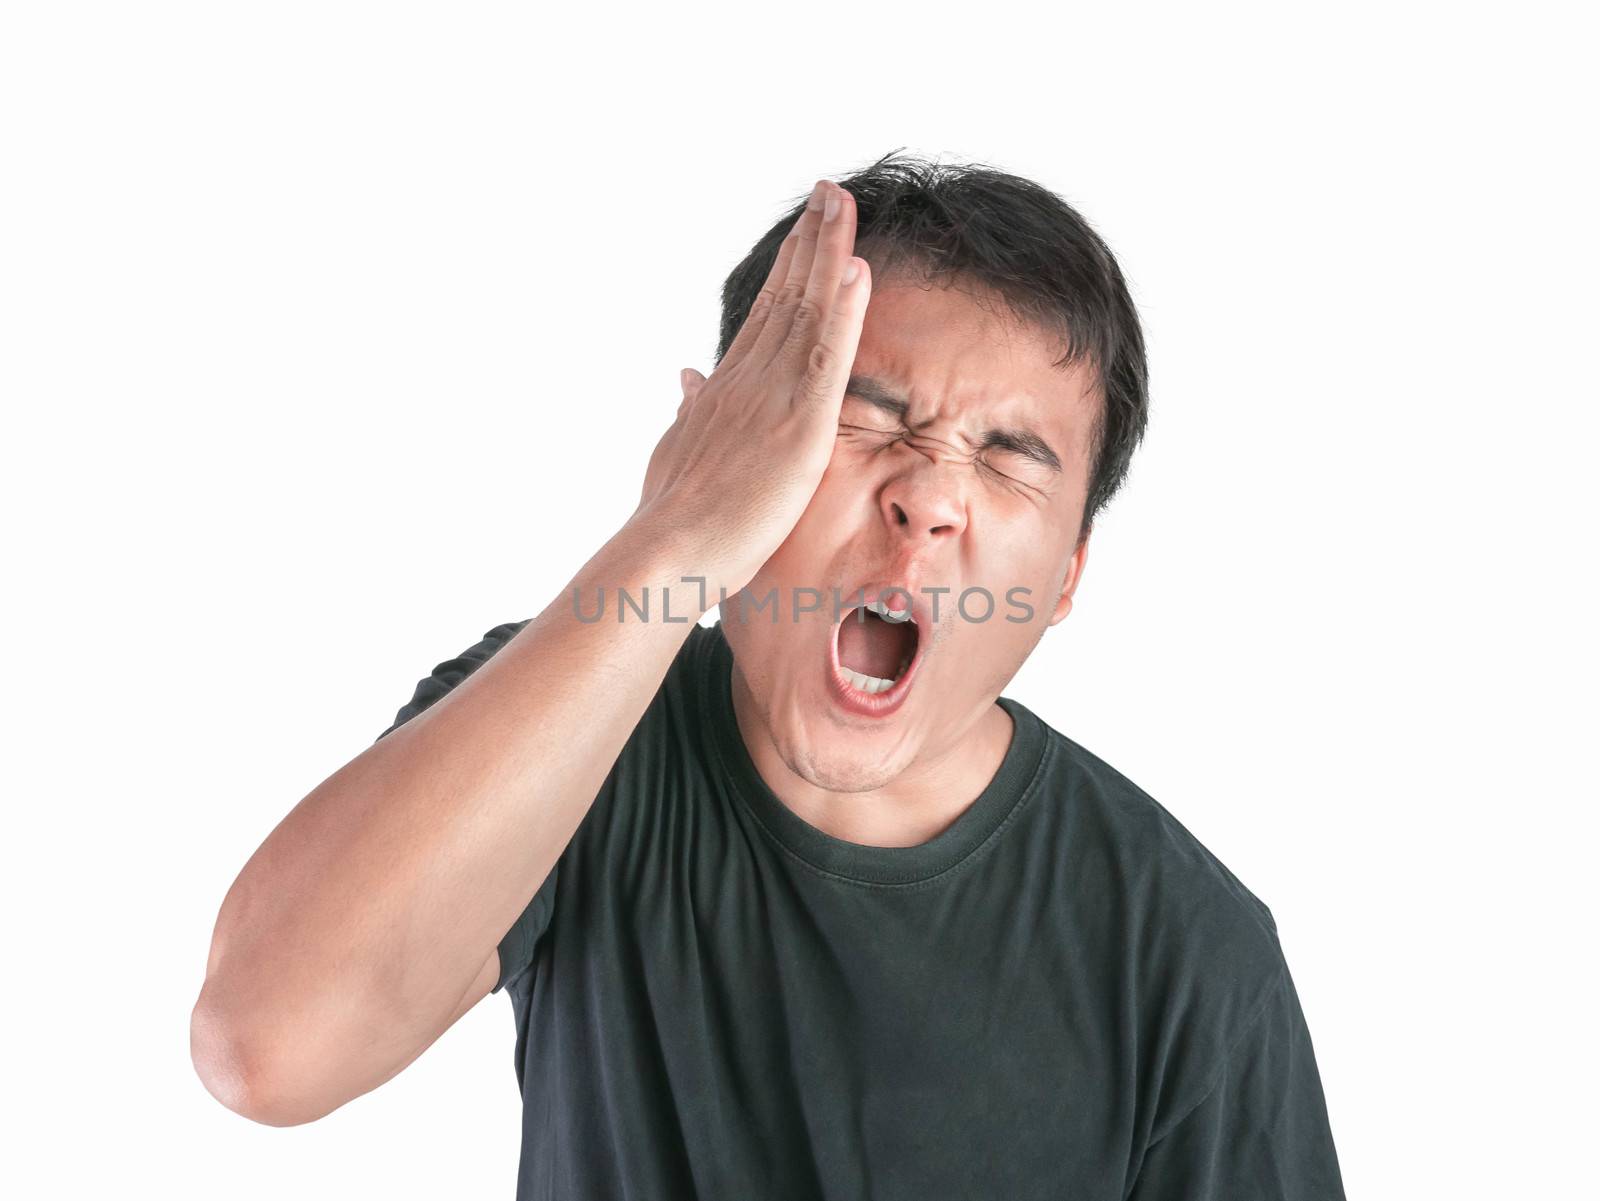 Stressed and frustrated face of Asian man wearing black t-shirt isolated on white background.